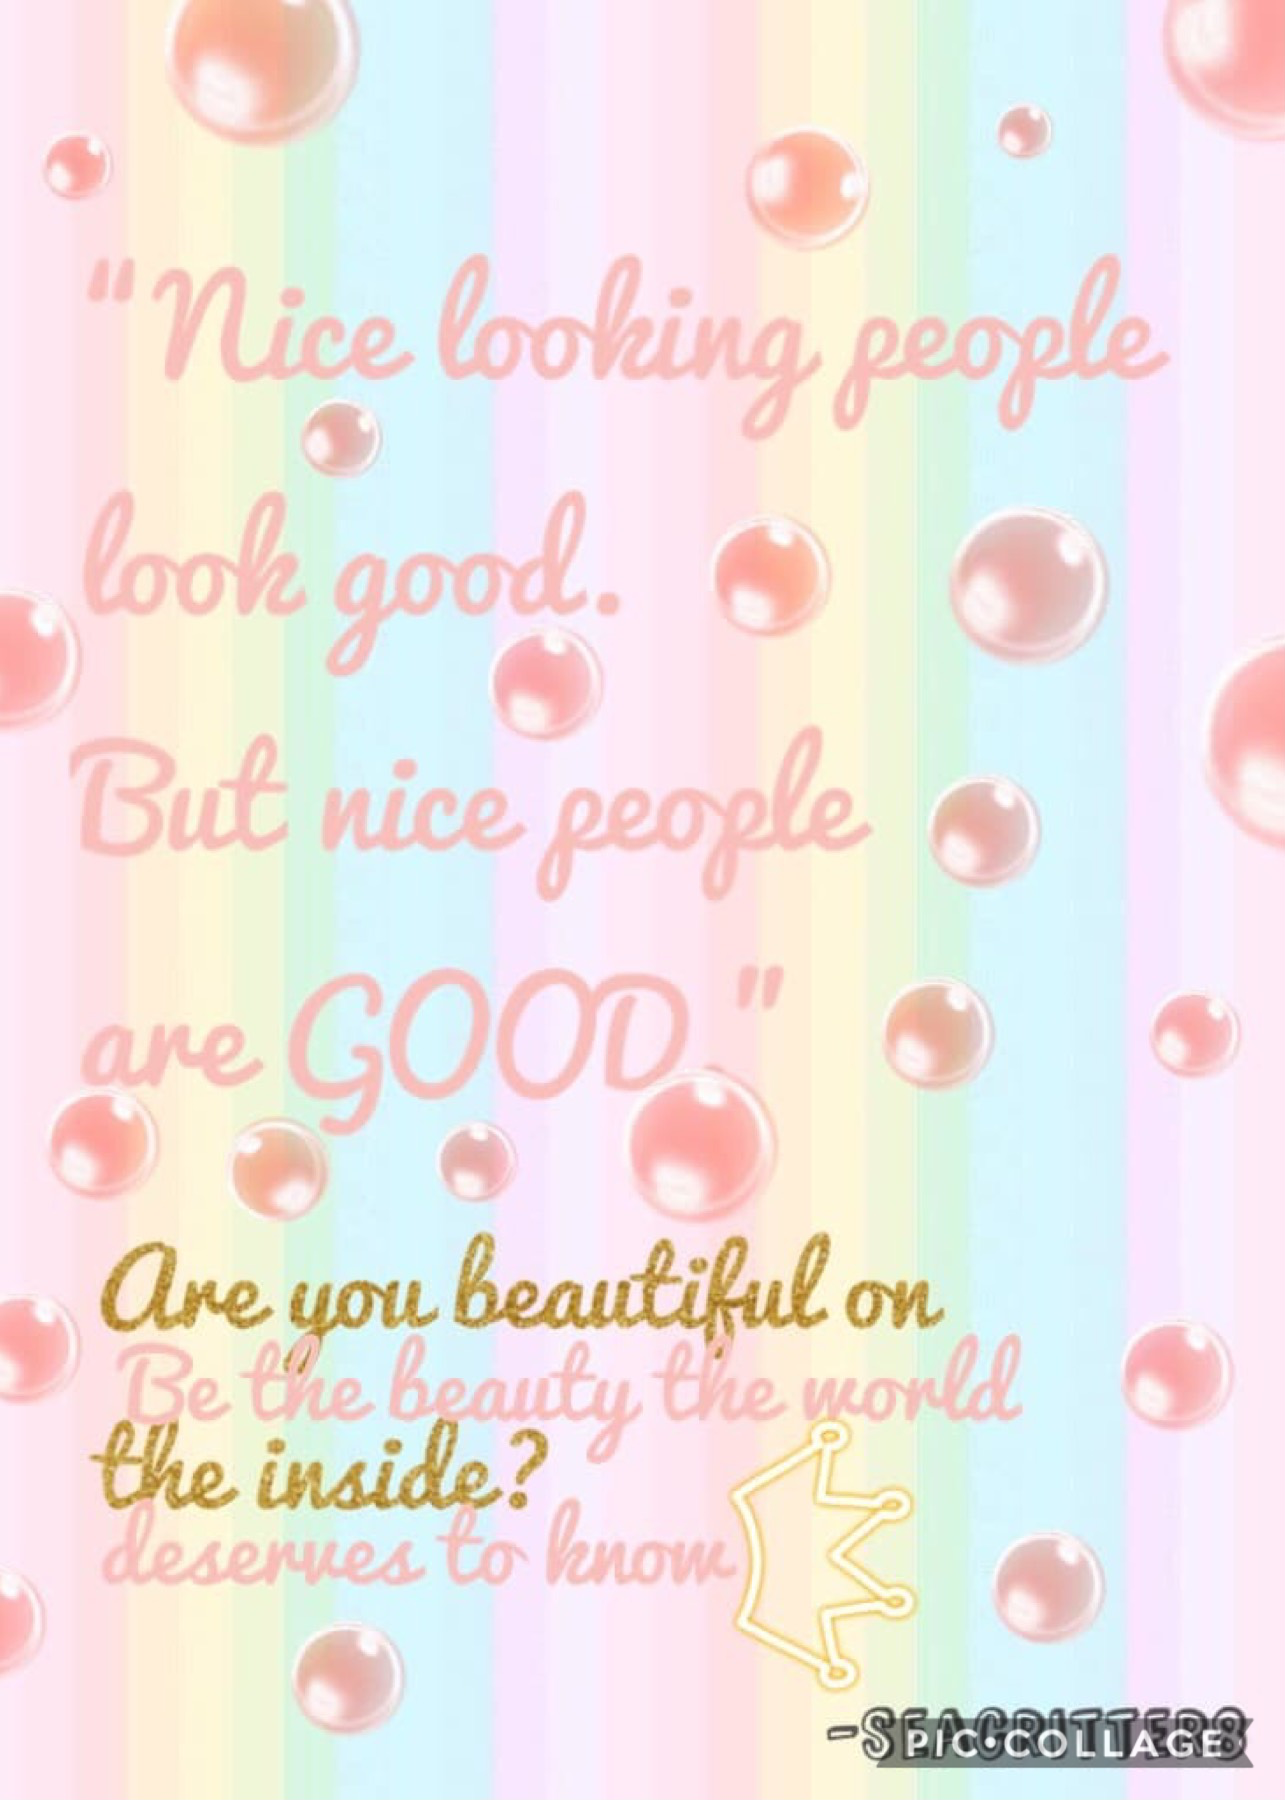 credit goes to @seacritter8 for this collage! she made the quote too!💖💖 // stay kind everyone. looks really do not matter, what matters is you are good at heart✨and your kindness can change the world for the better💖